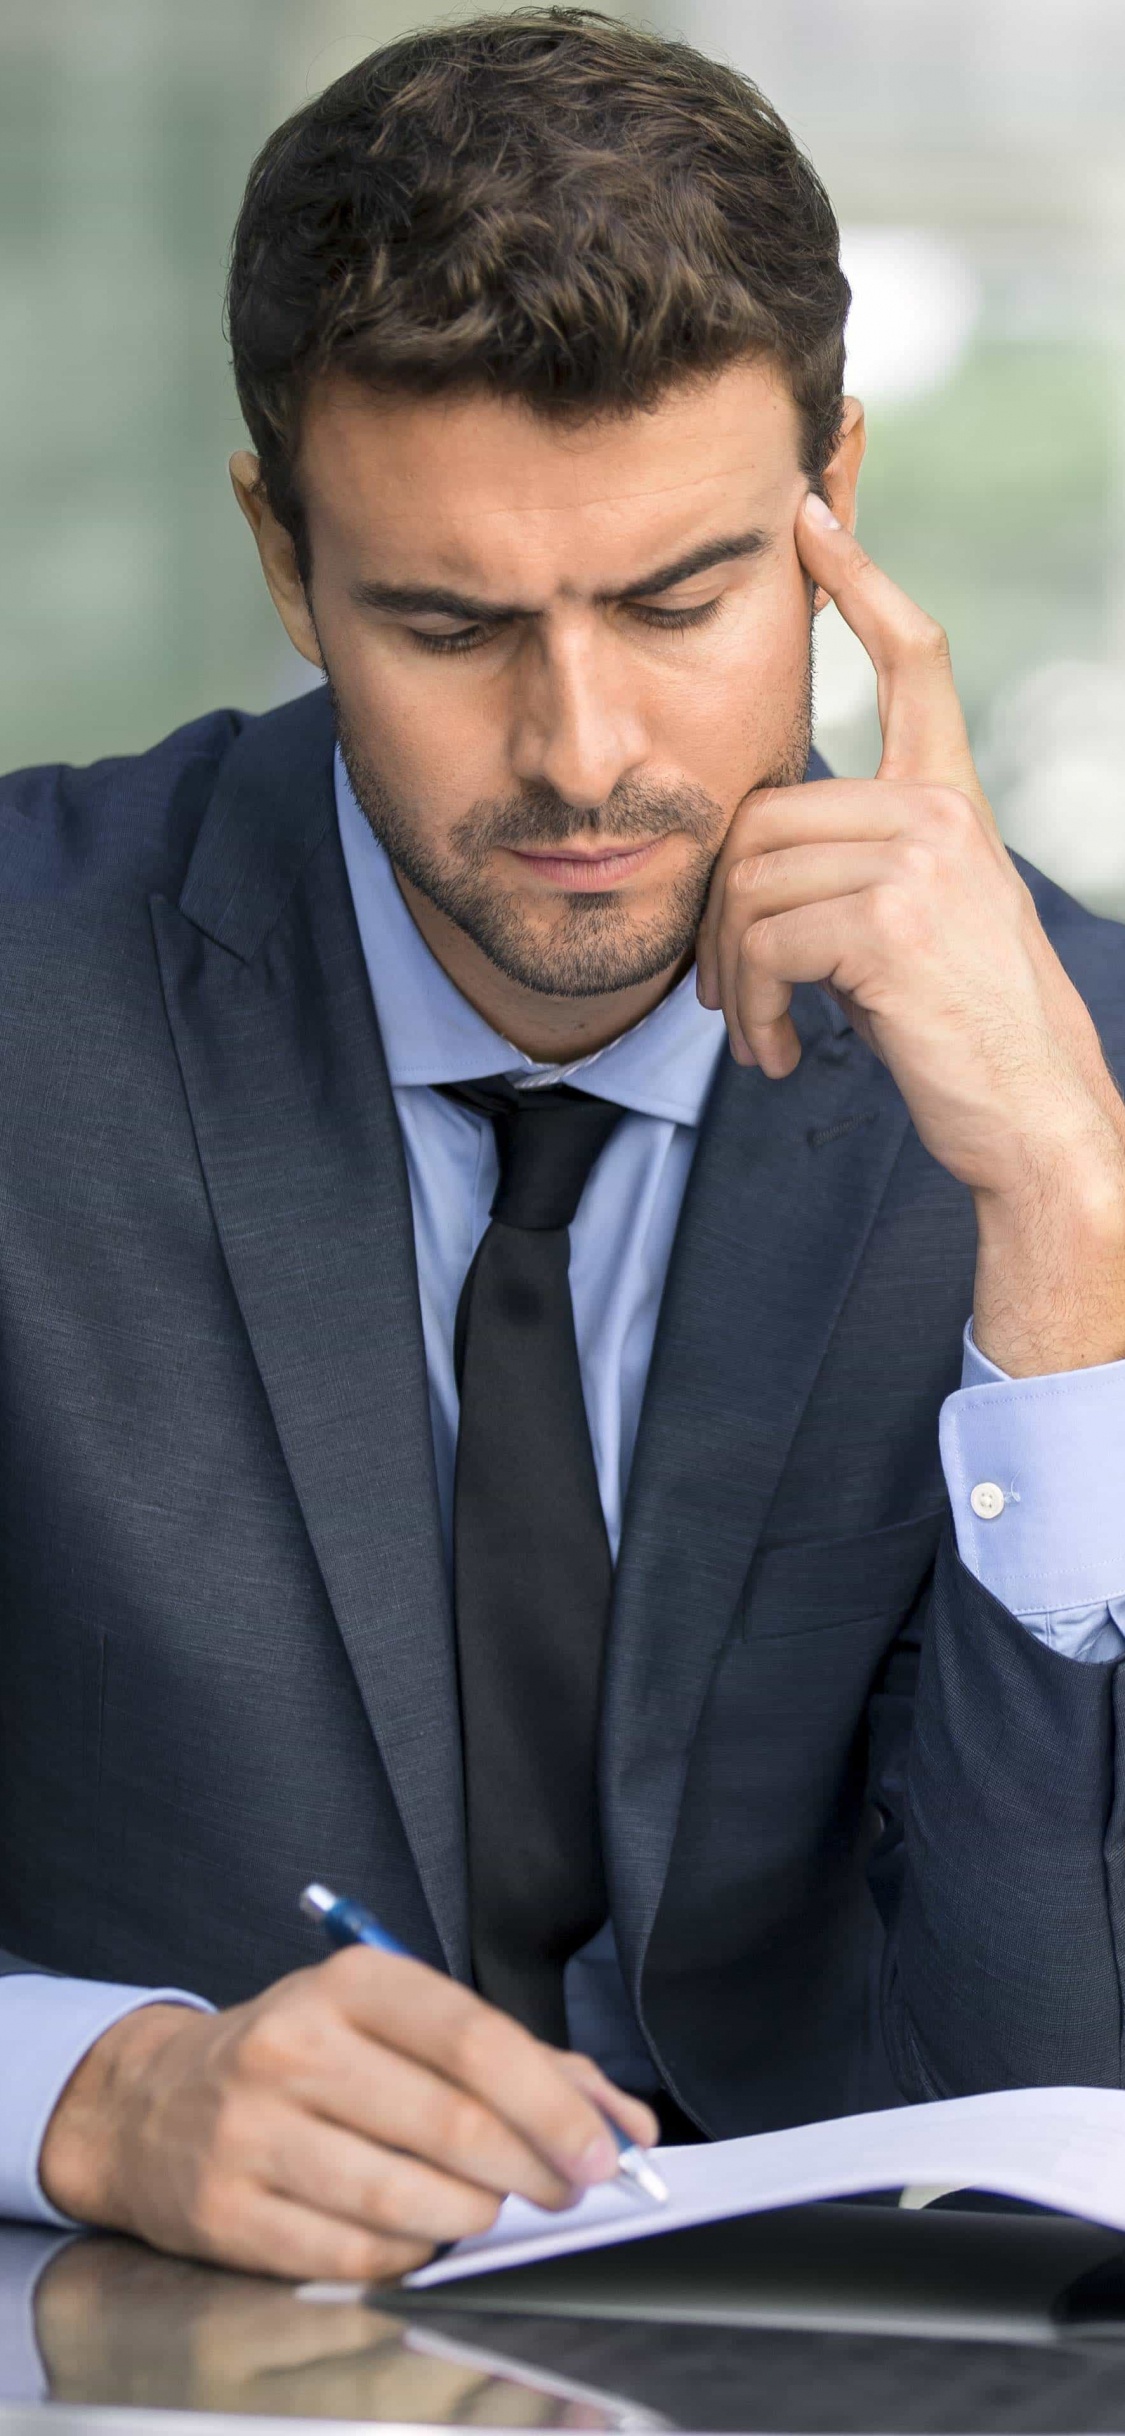 Businessman Thinking, Businessperson, Thought, Job, Business. Wallpaper in 1125x2436 Resolution